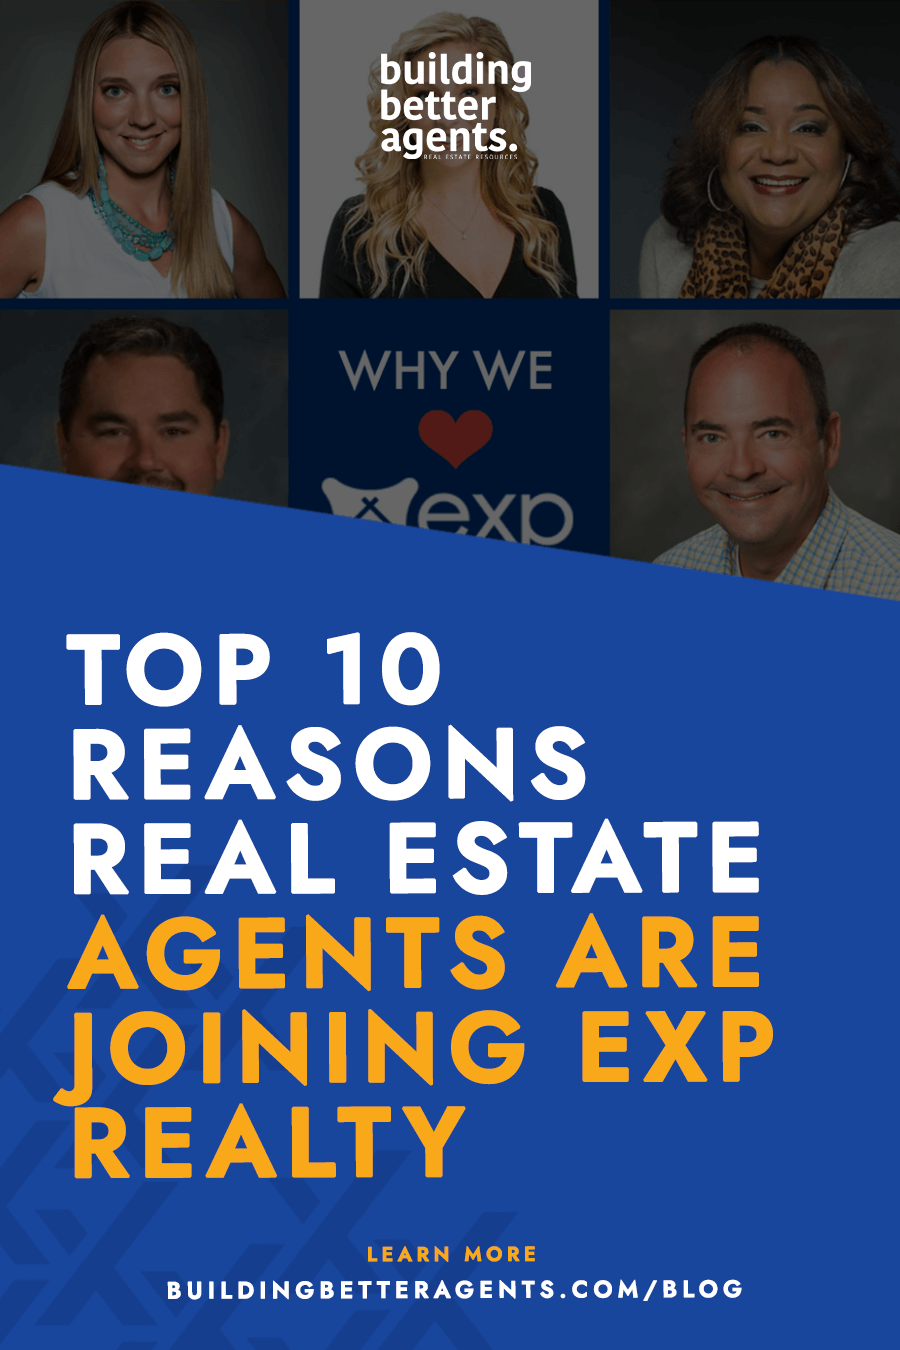 Top 10 Reasons Real Estate Agents are Joining EXP Realty